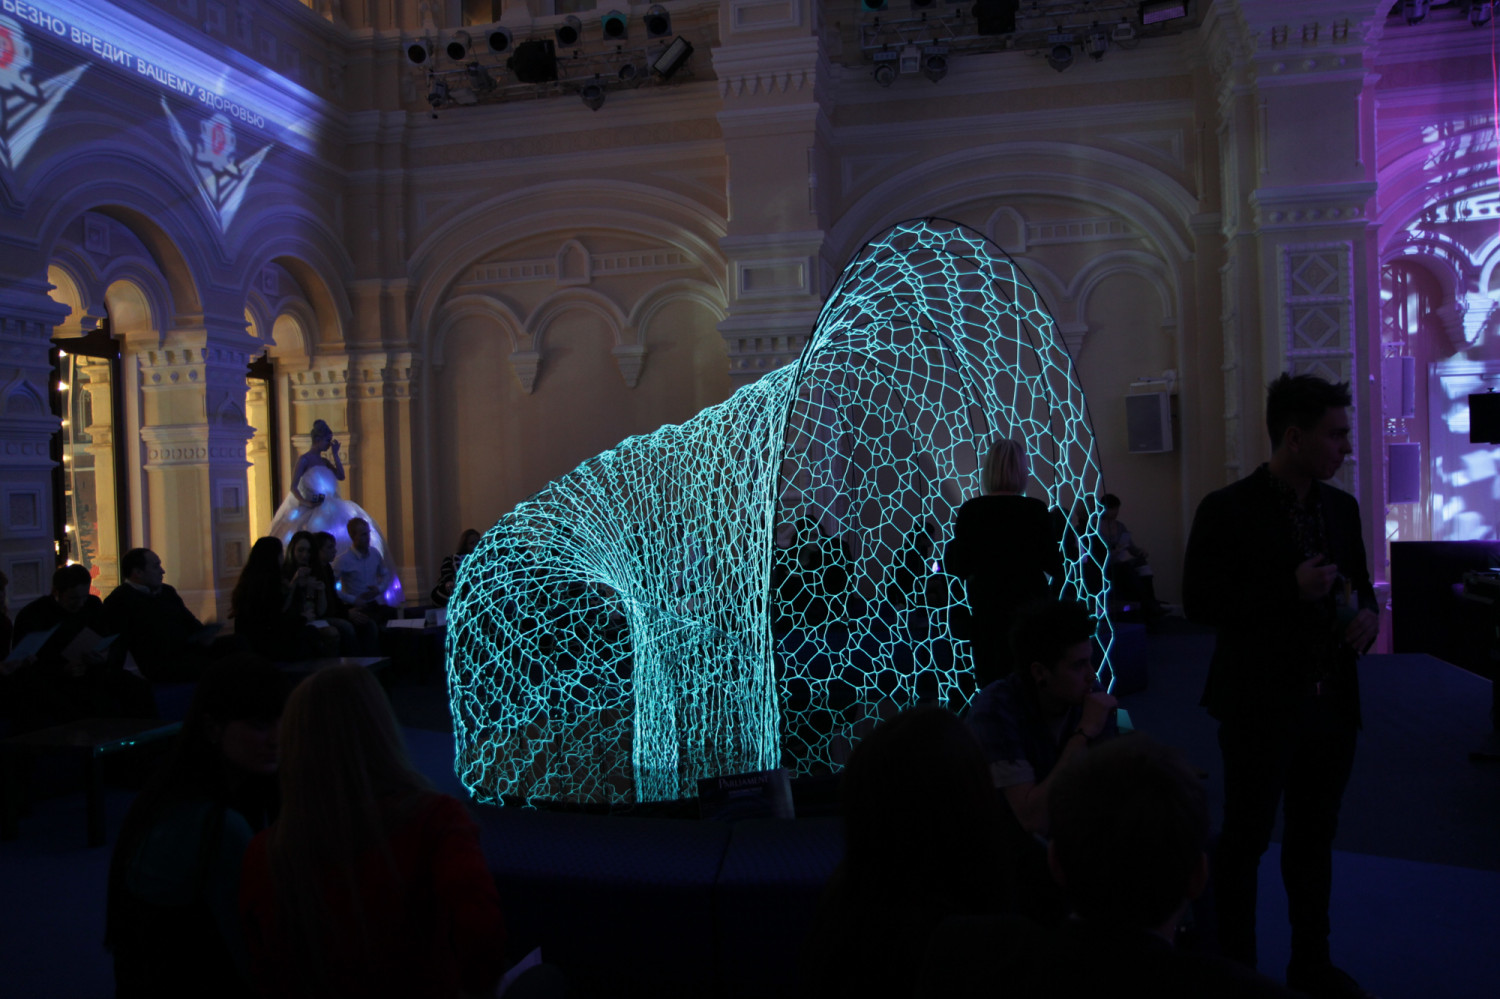 A generative, emergent light and sound environment with a luminous and responsive growth